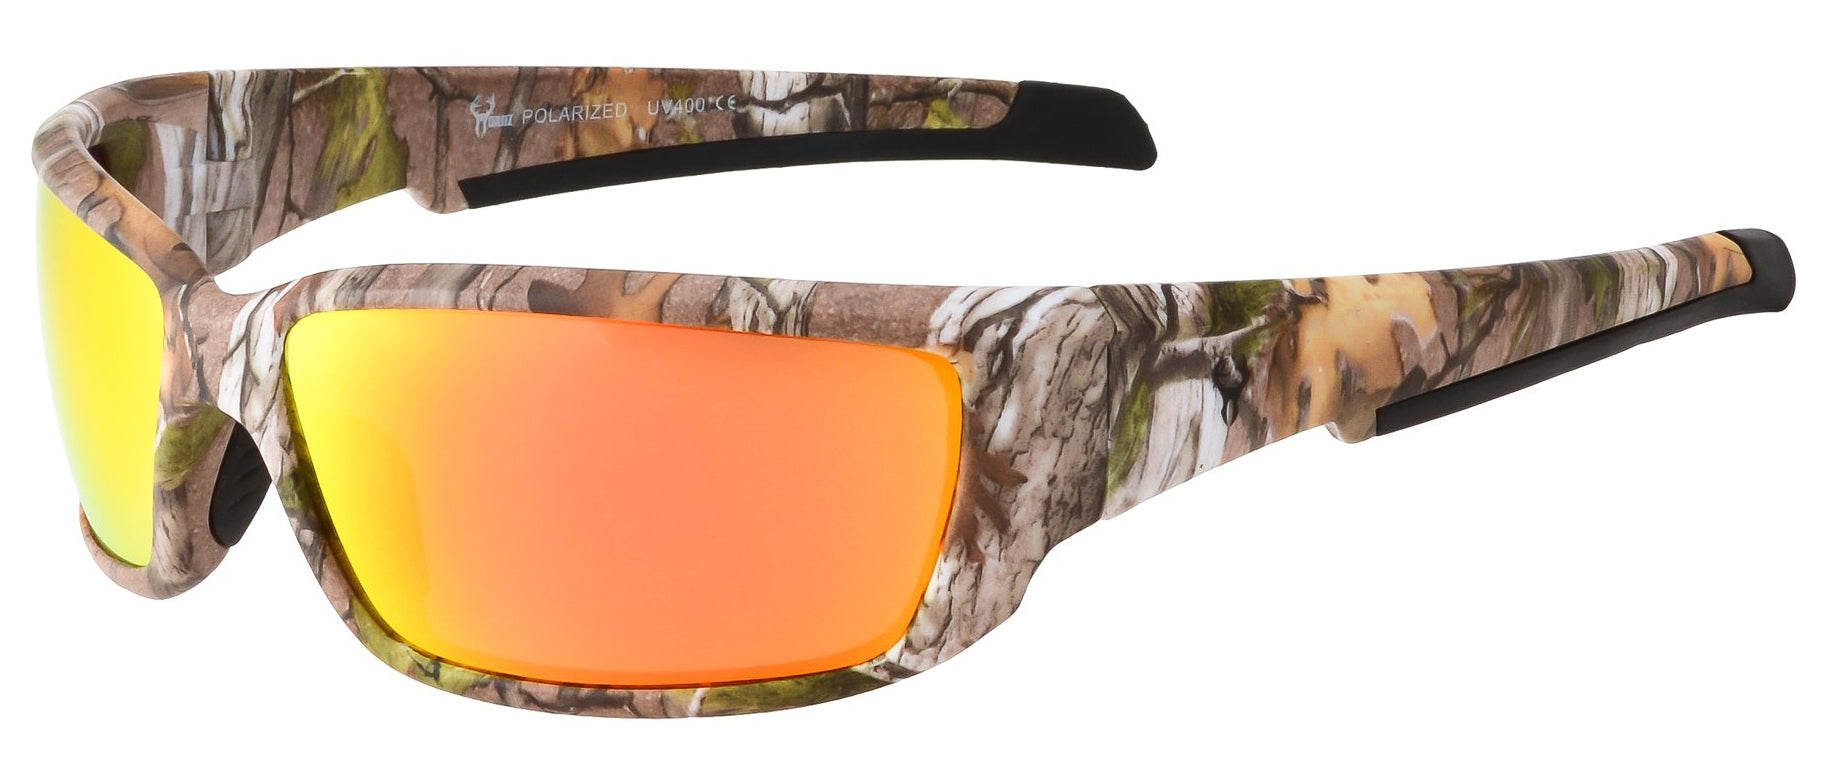 Hornz Brown Forest Camouflage Polarized Sunglasses for Men - WhiteTail -  Free Matching Microfiber Pouch - Brown Camo Frame - Fire Orange Lens